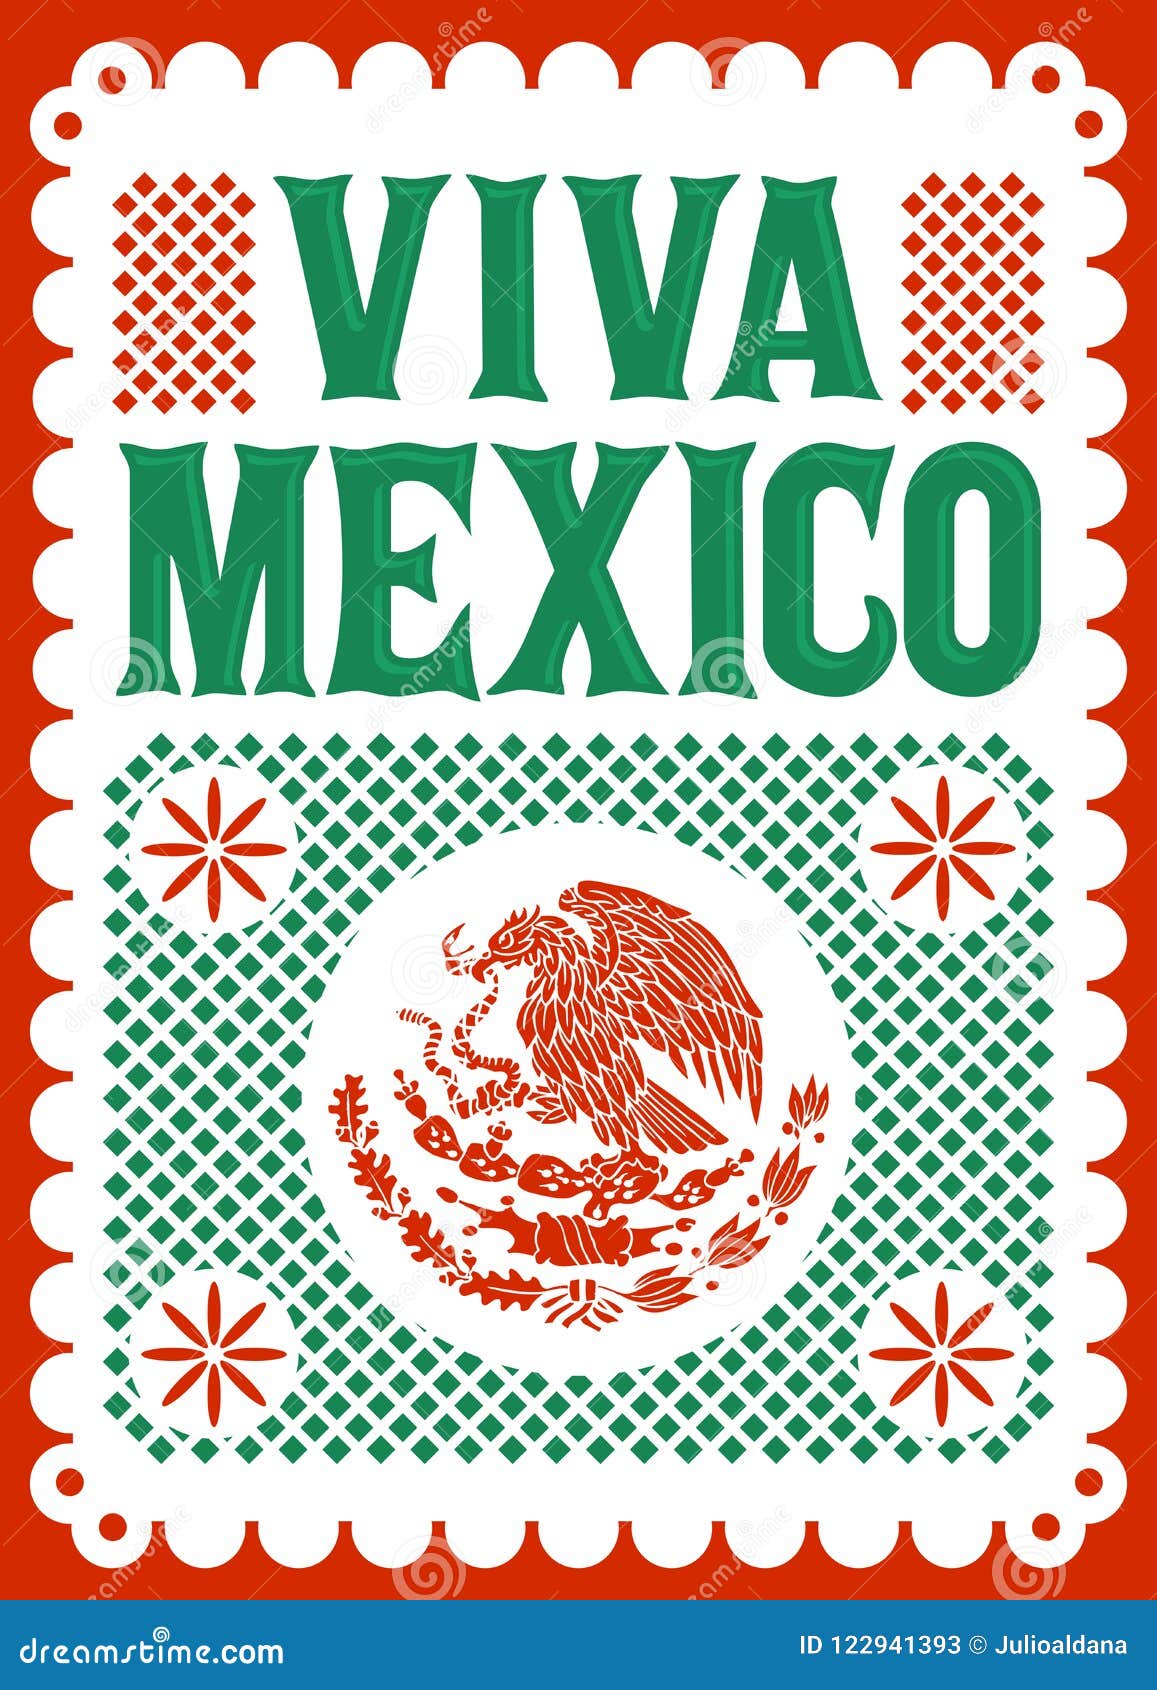 viva mexico mexican holiday  poster, street decoration .